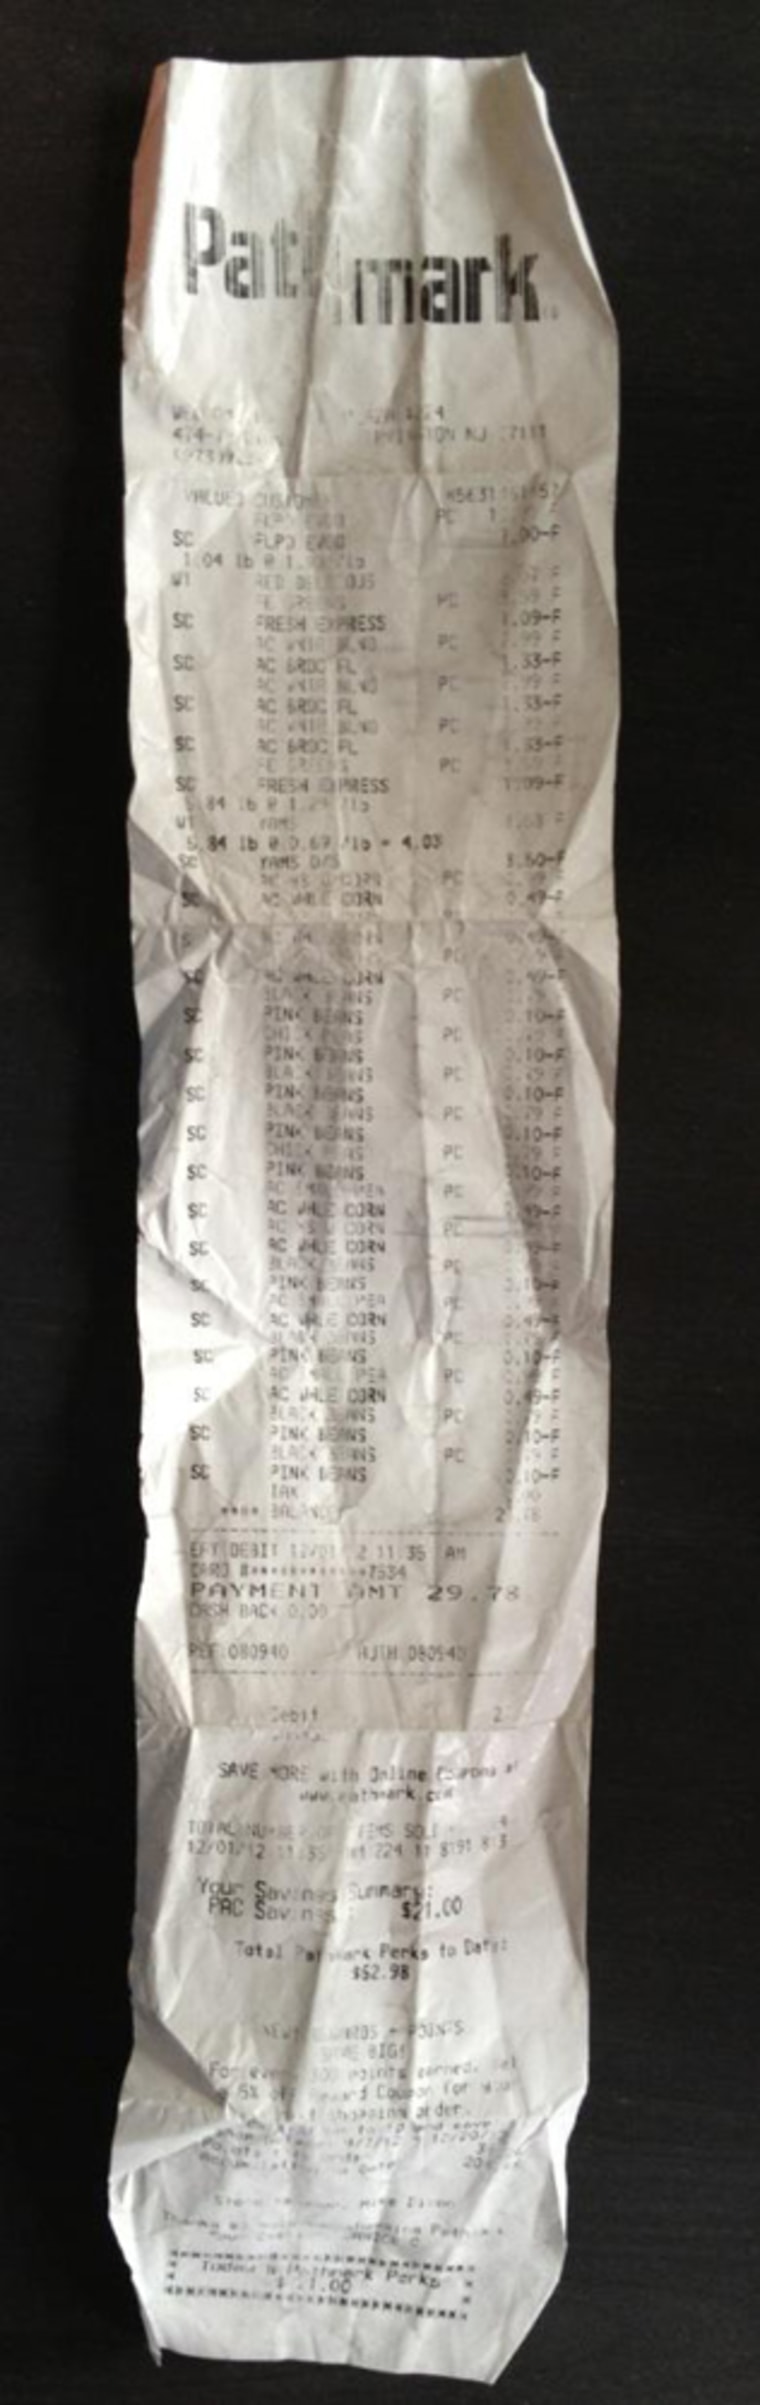 Booker spent $29.78 at the grocery store at the start of his challenge.